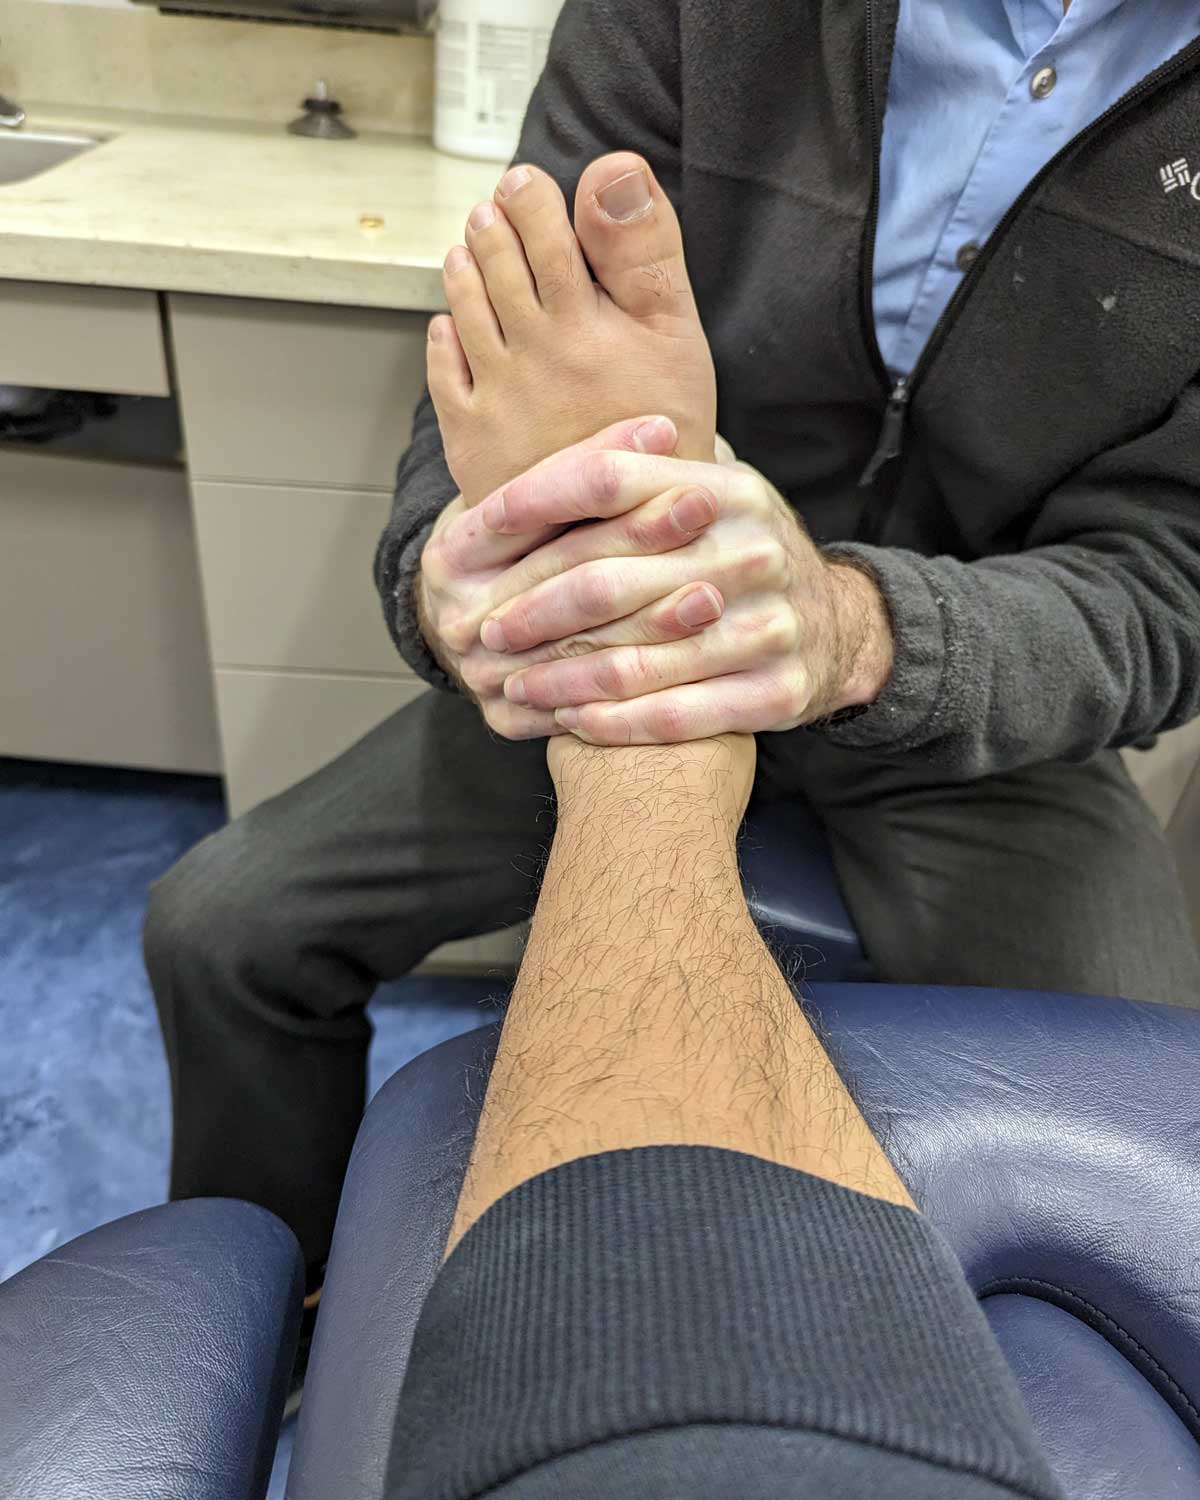 A physical therapist works to address a patient's Achilles tendon pain.